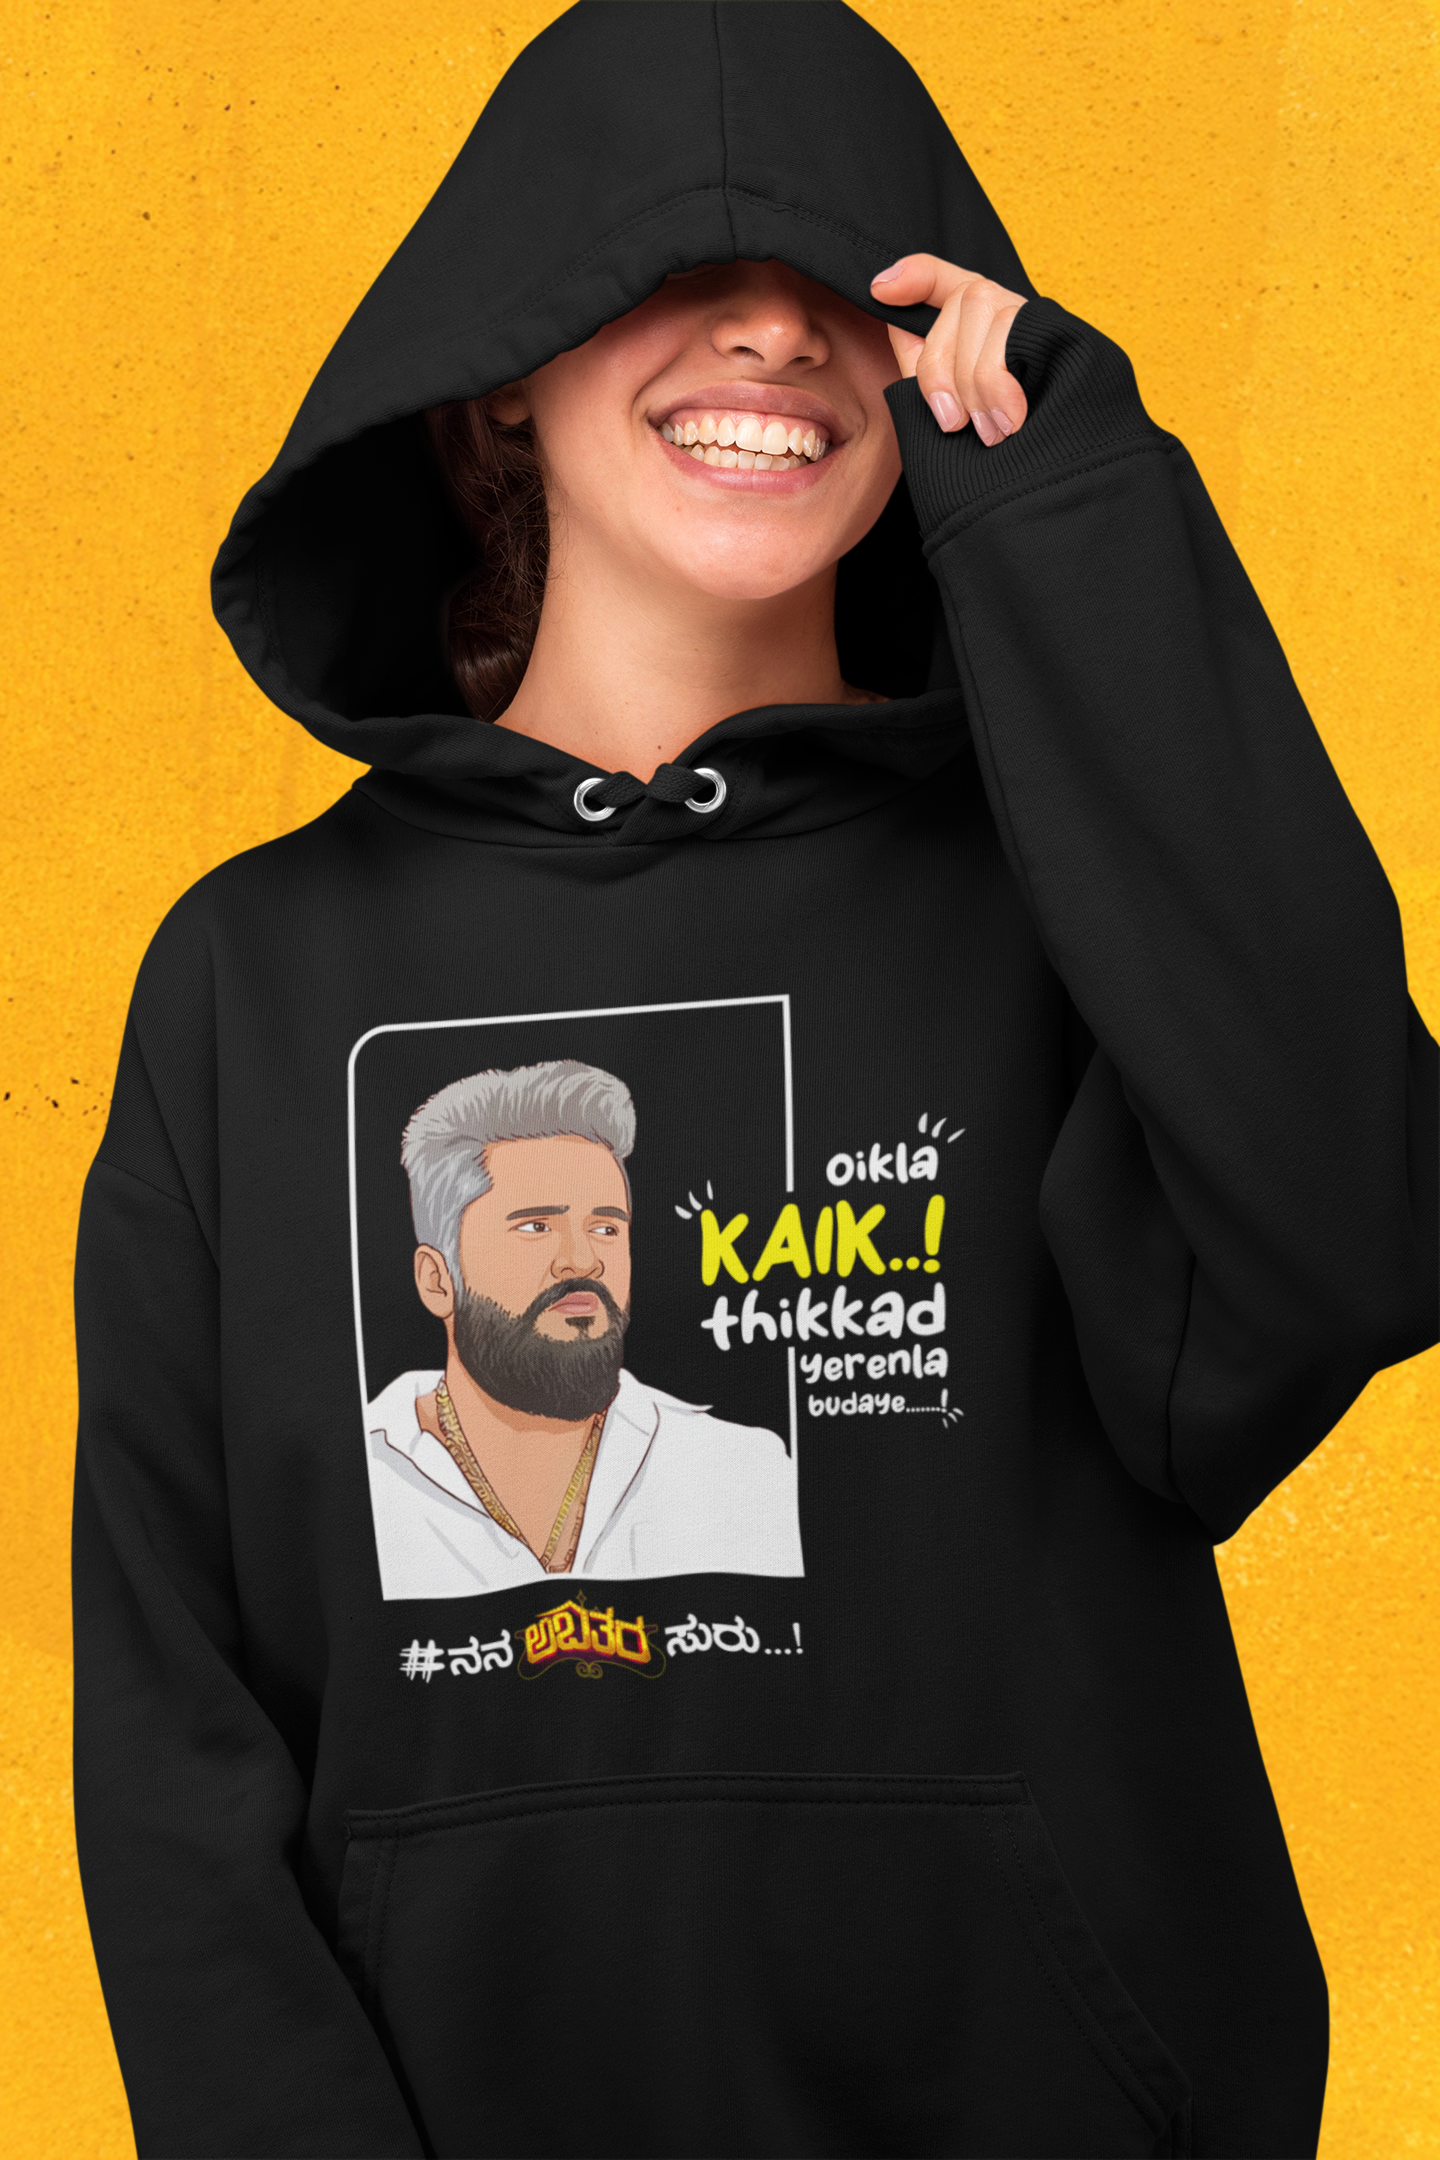 Kaik Thikkad Unisex Relaxed Fit Hoodie